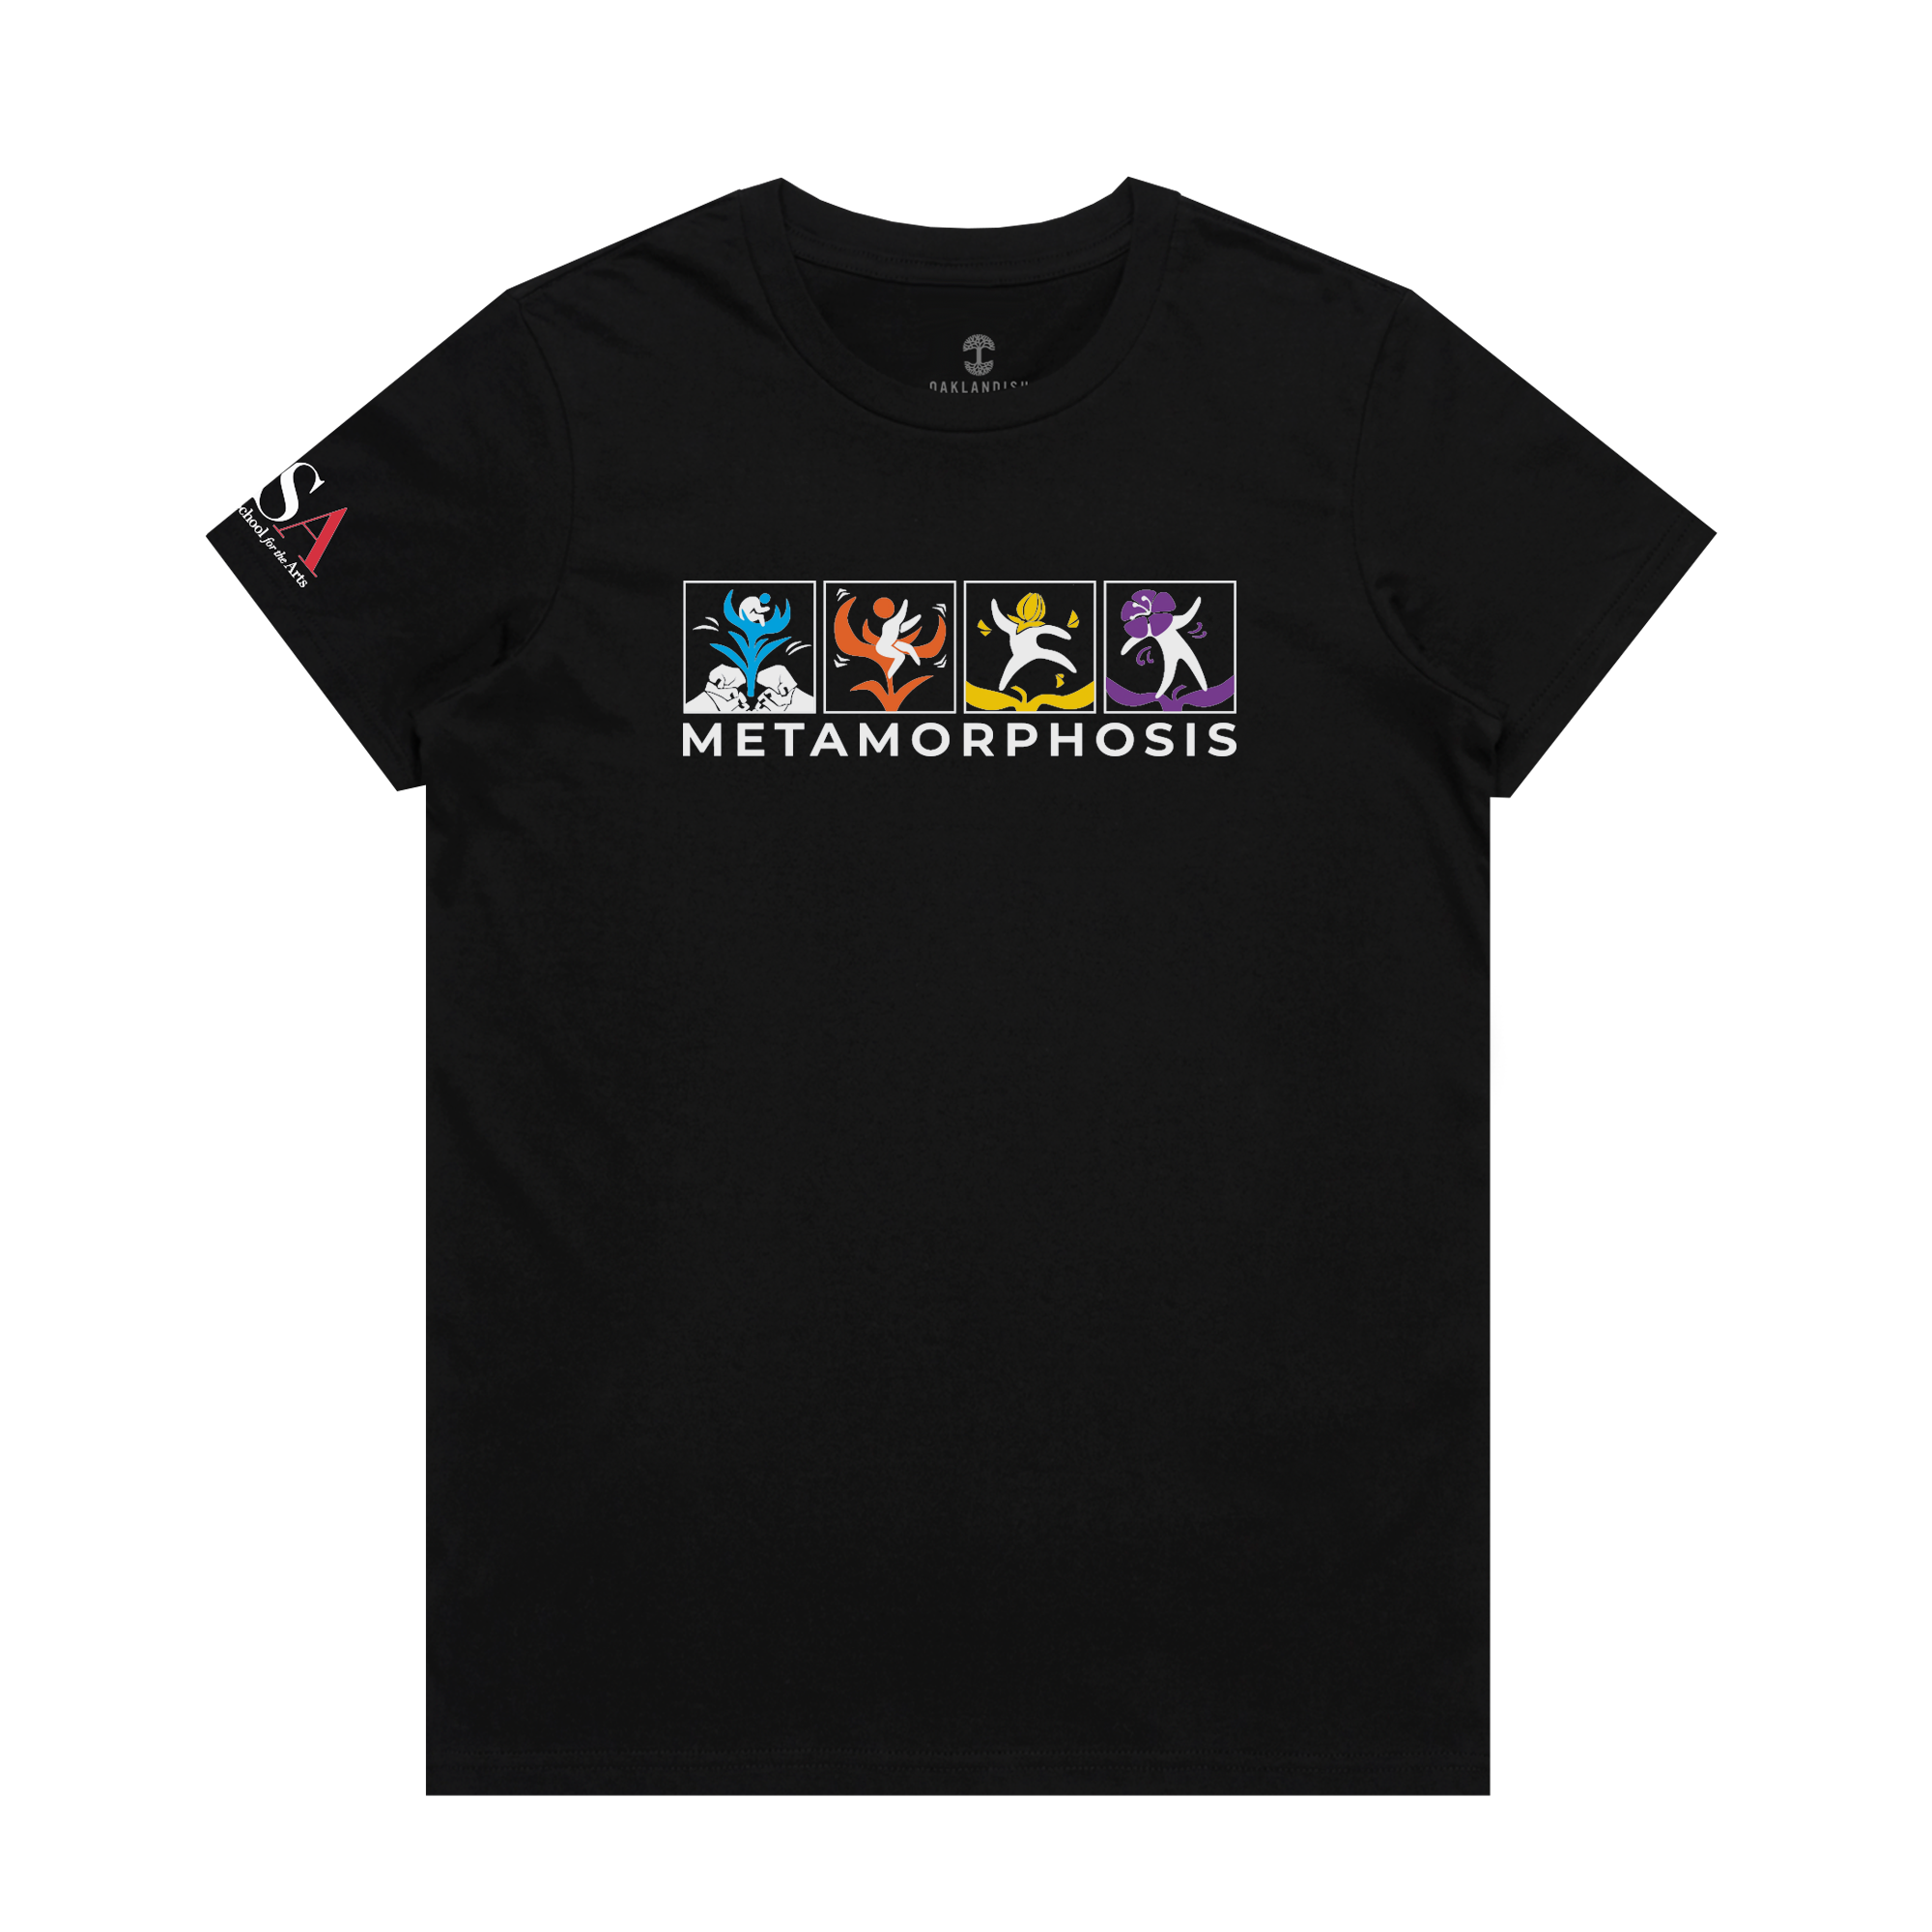 Black women's cut t-shirt with full-color METAMORPHOSIS logo and wordmark on the chest.